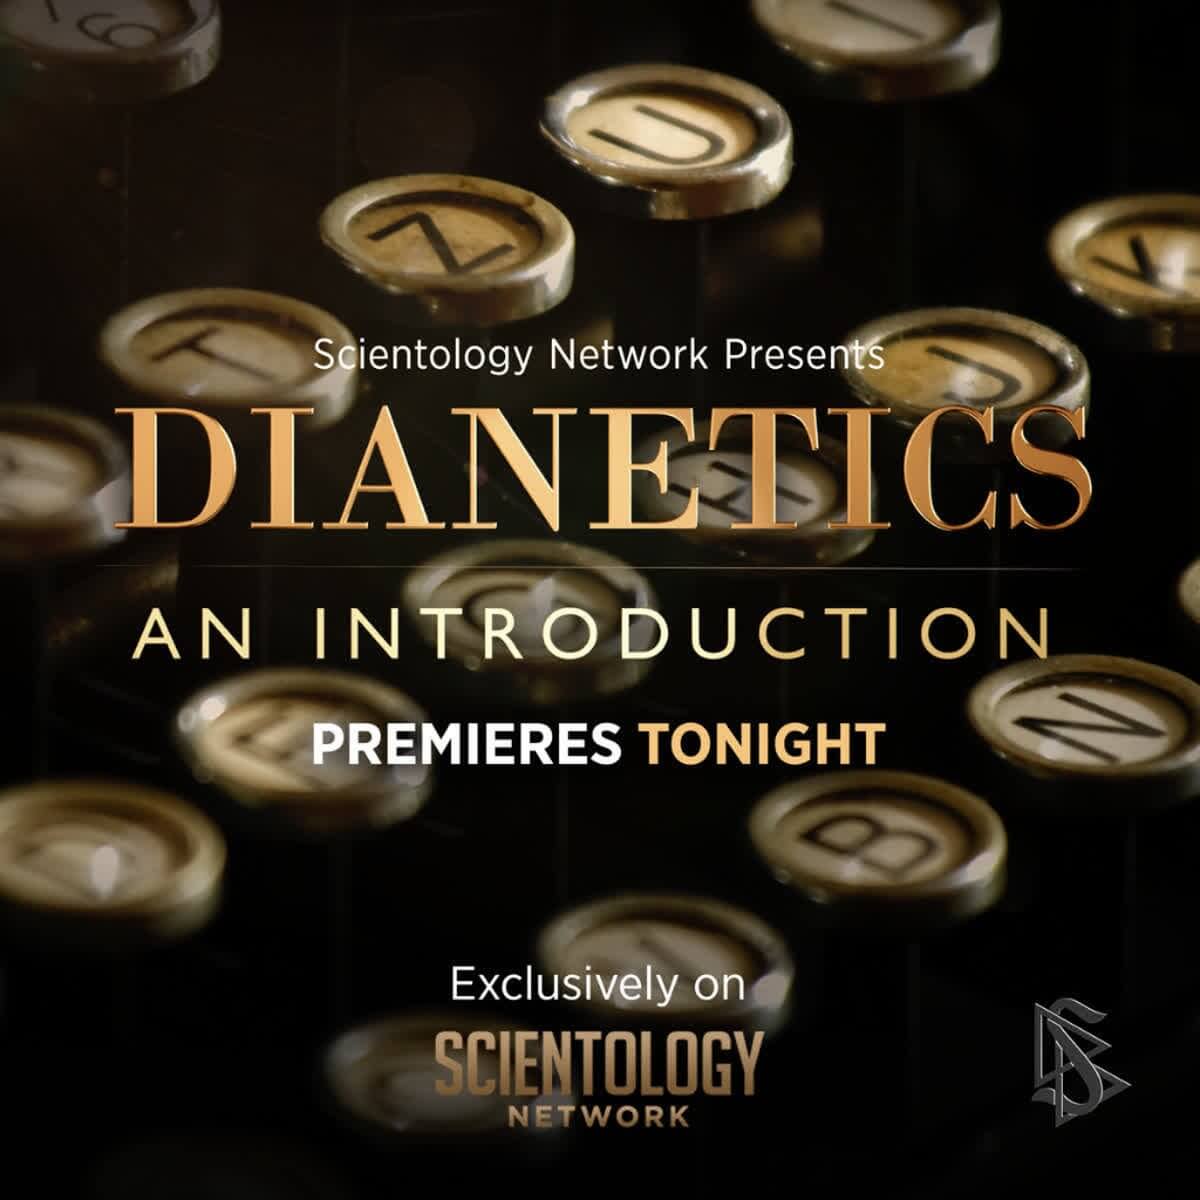 Dianetics introduction AD Europe Day is also Dianetics Day